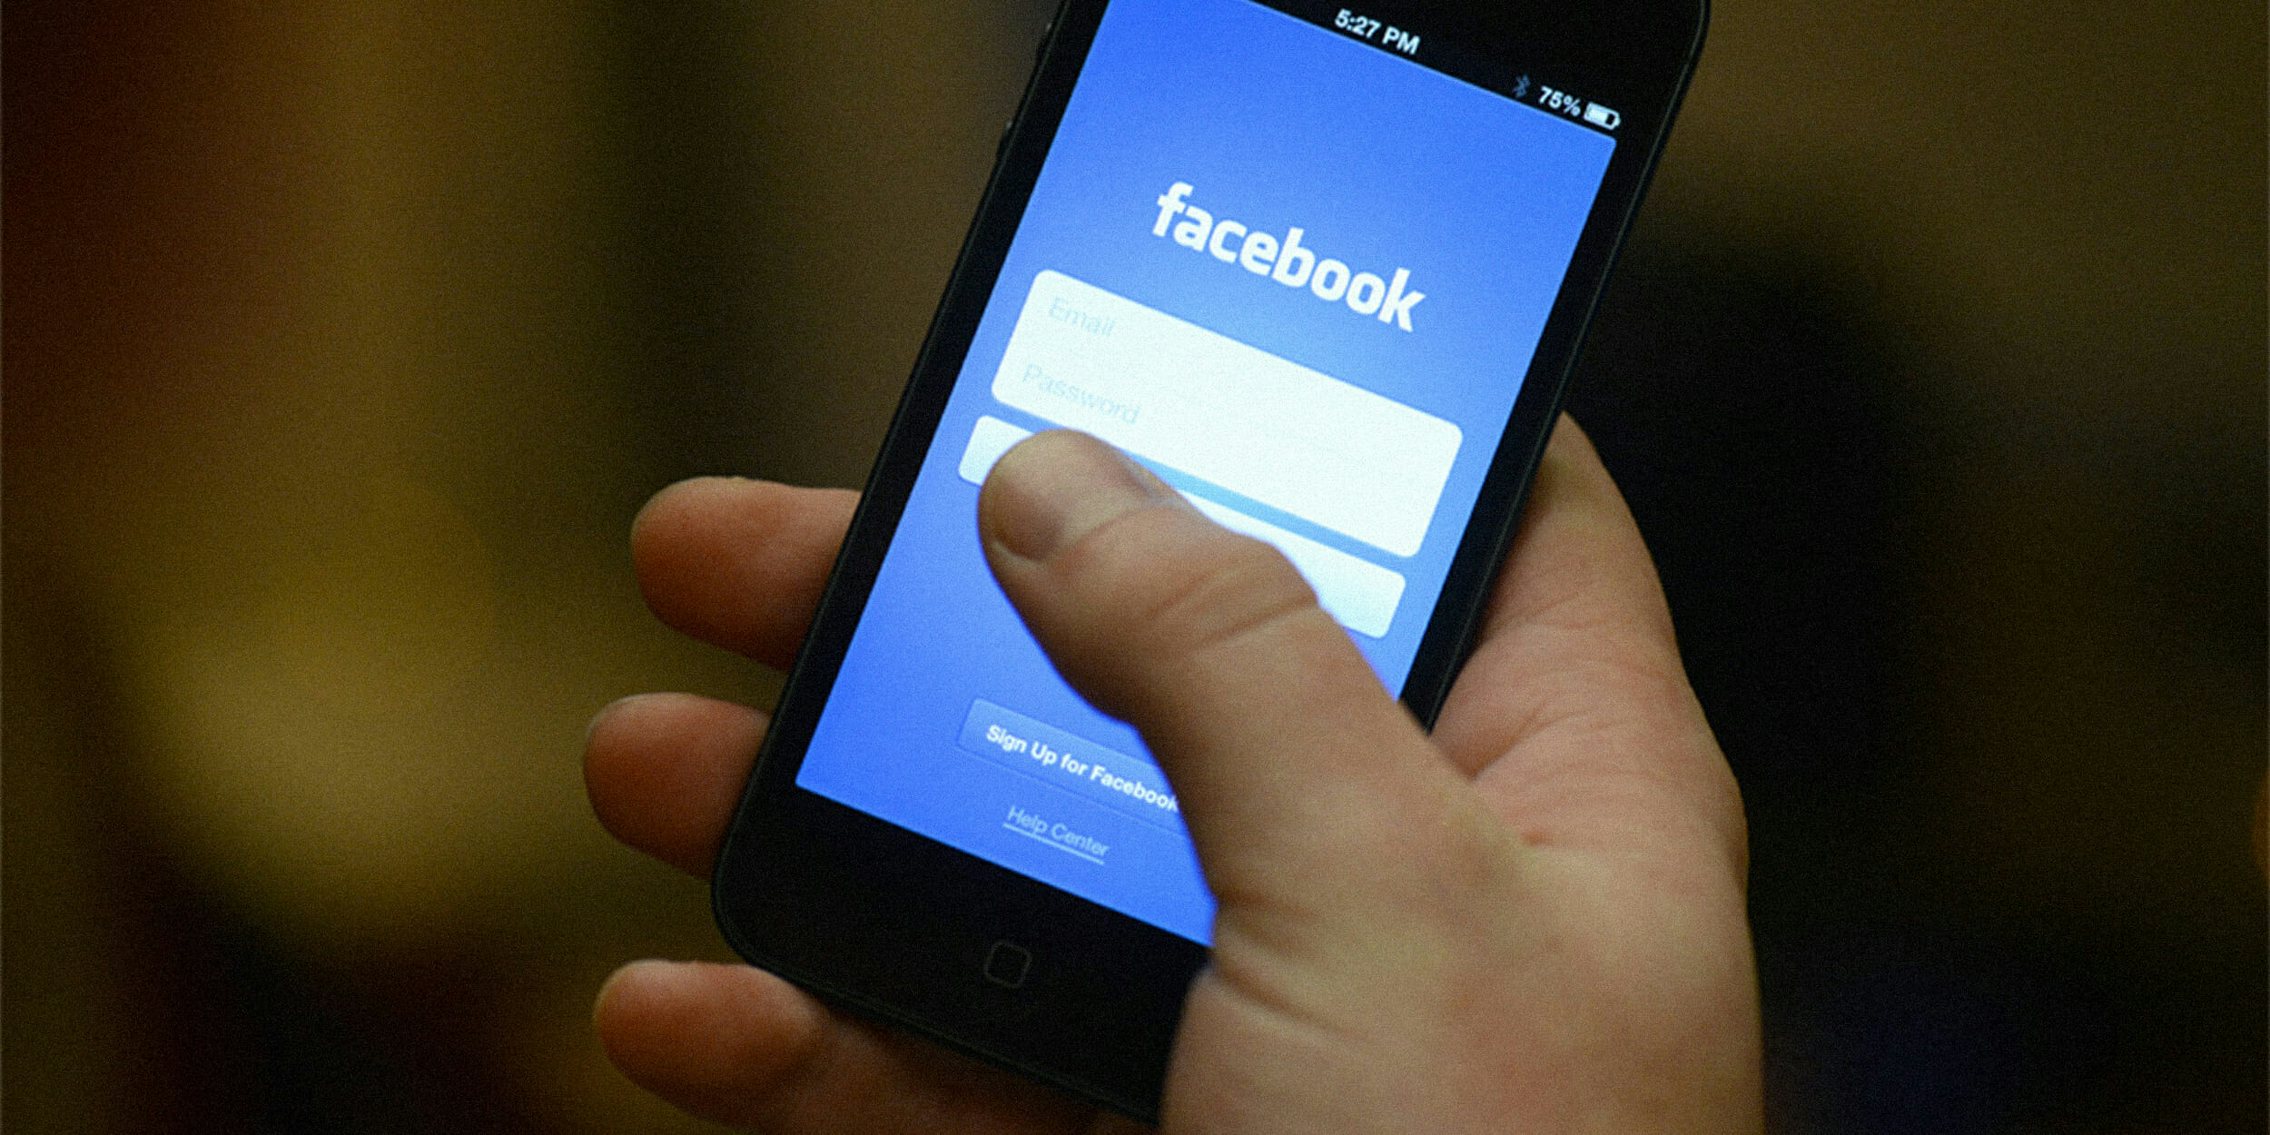 Hand opening Facebook mobile app